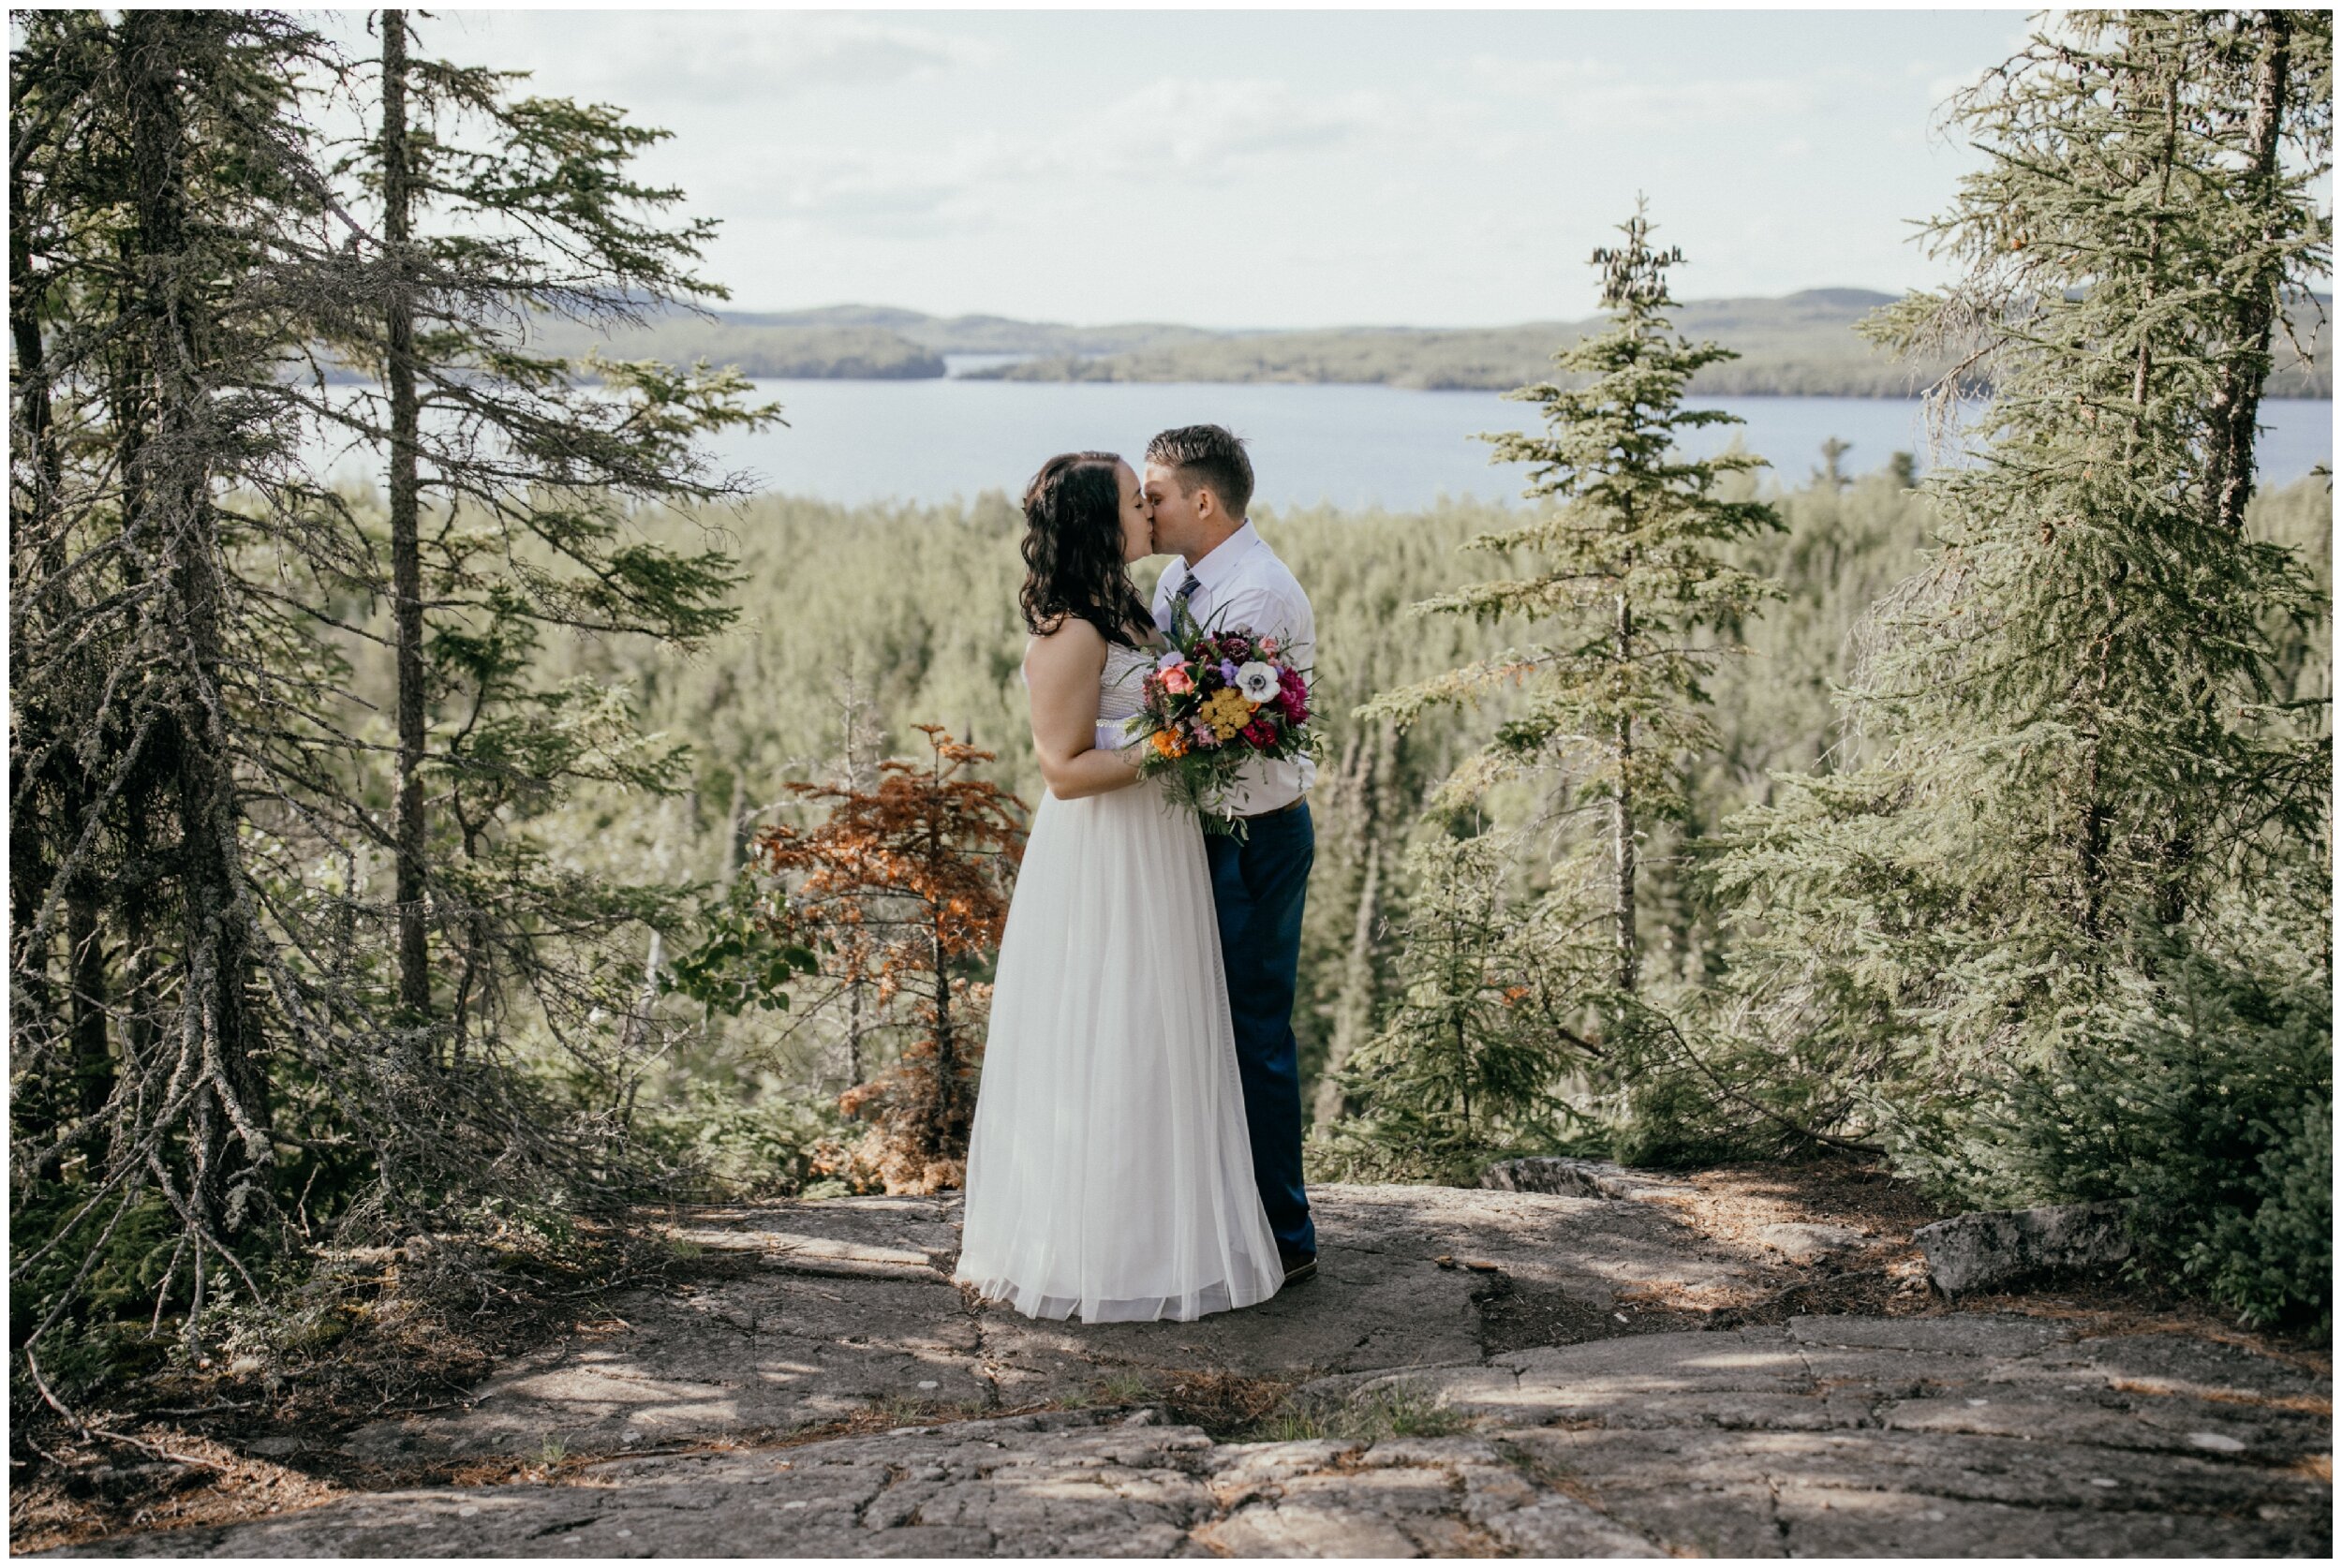 Northern Minnesota elopement at lookout point on the gunflint trail